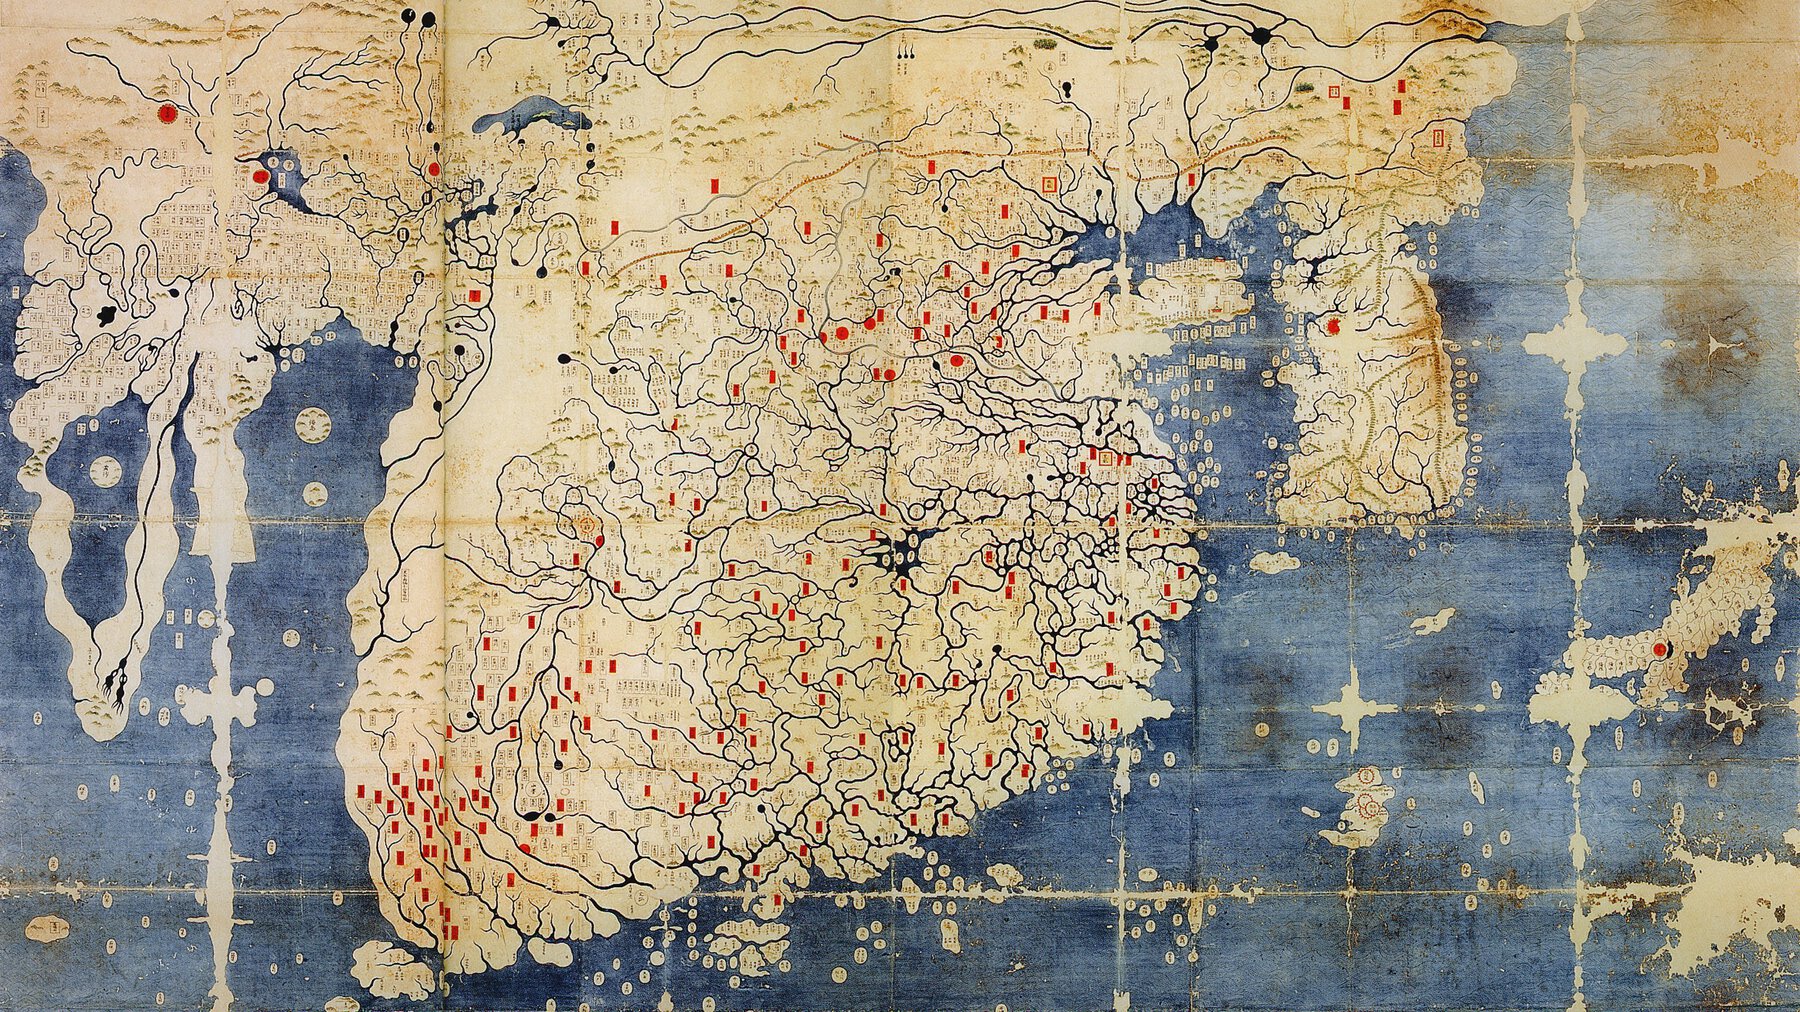 Korean world map centered on China and Korea showing rivers in blue and settlements with red markers.